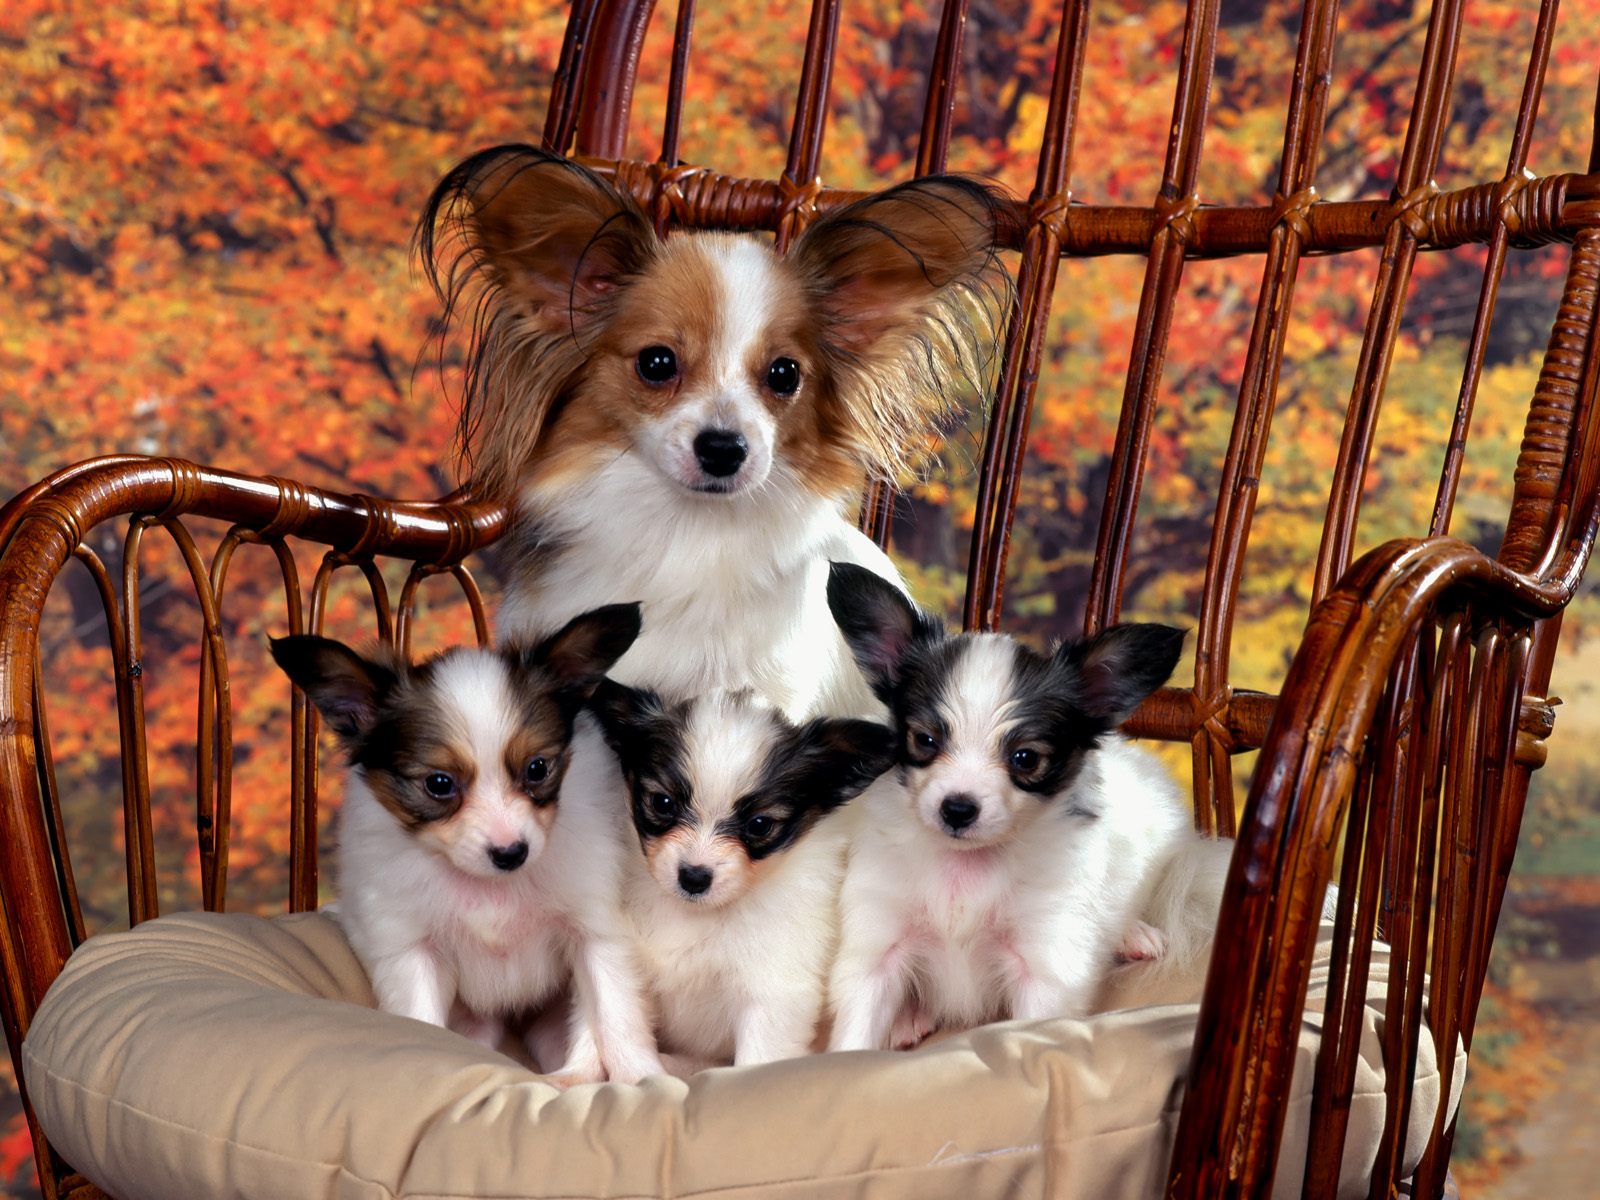 Desktop Wallpaper Gallery Animals Chihuahua Dog And Puppies